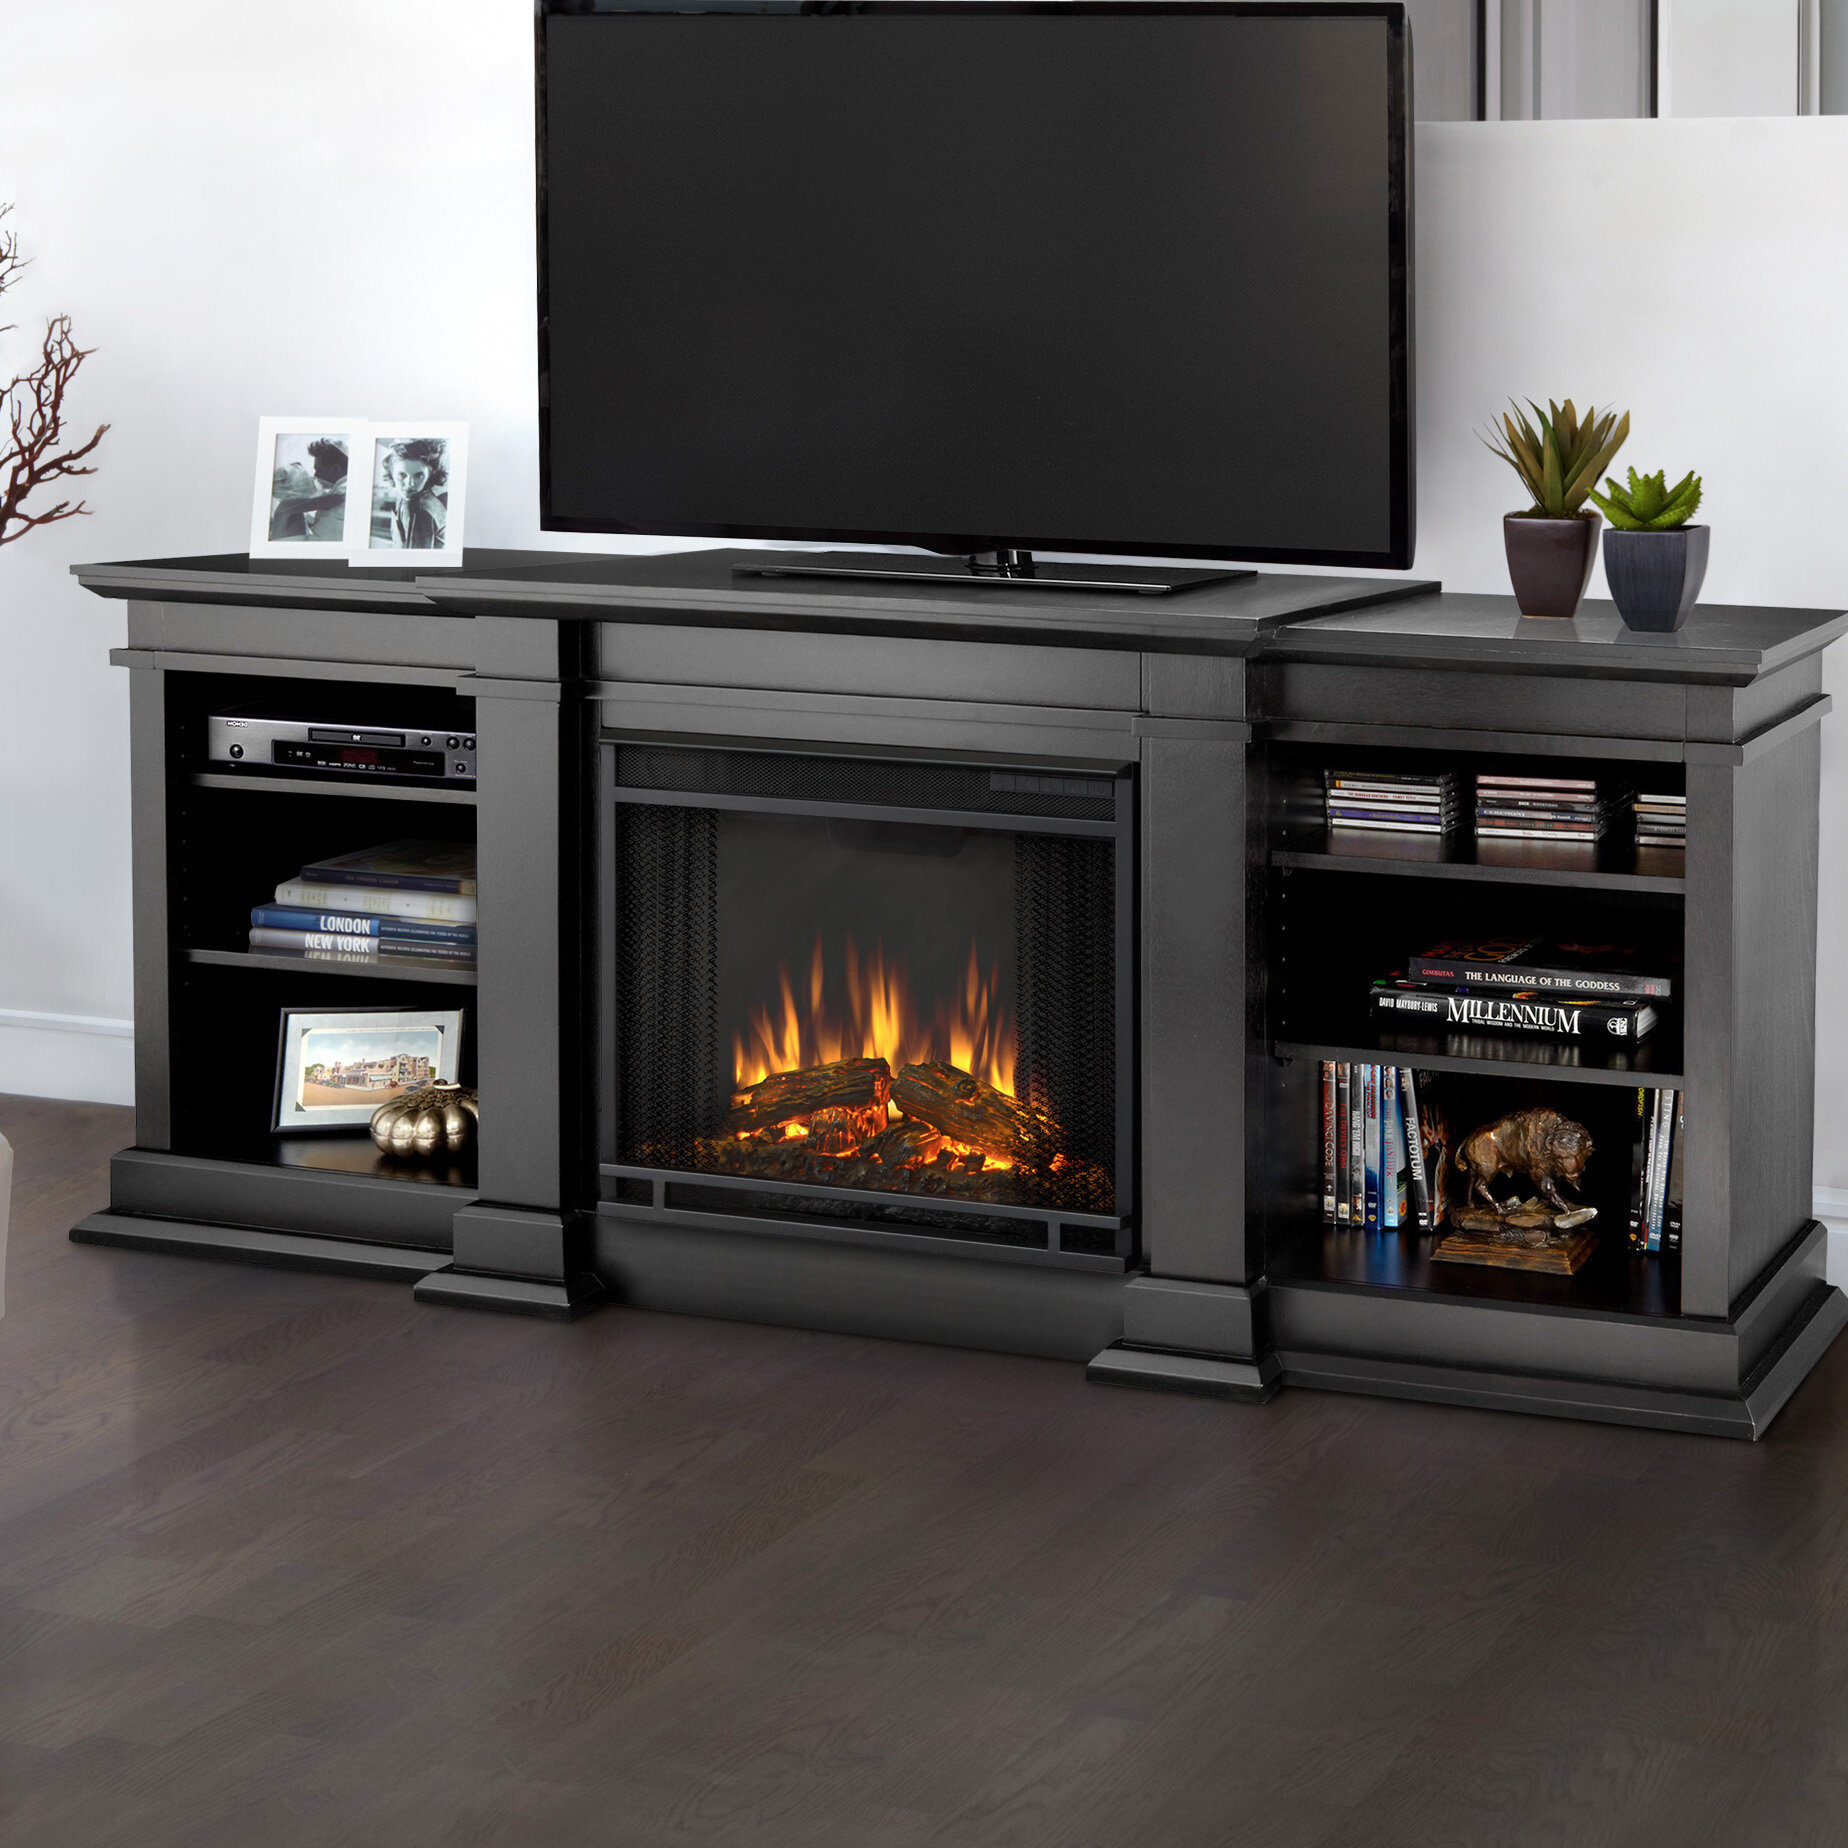 Large Electric Fireplace Tv Stand Inspirational 23 Fresh Electric Fireplace Wall Units Entertainment Center